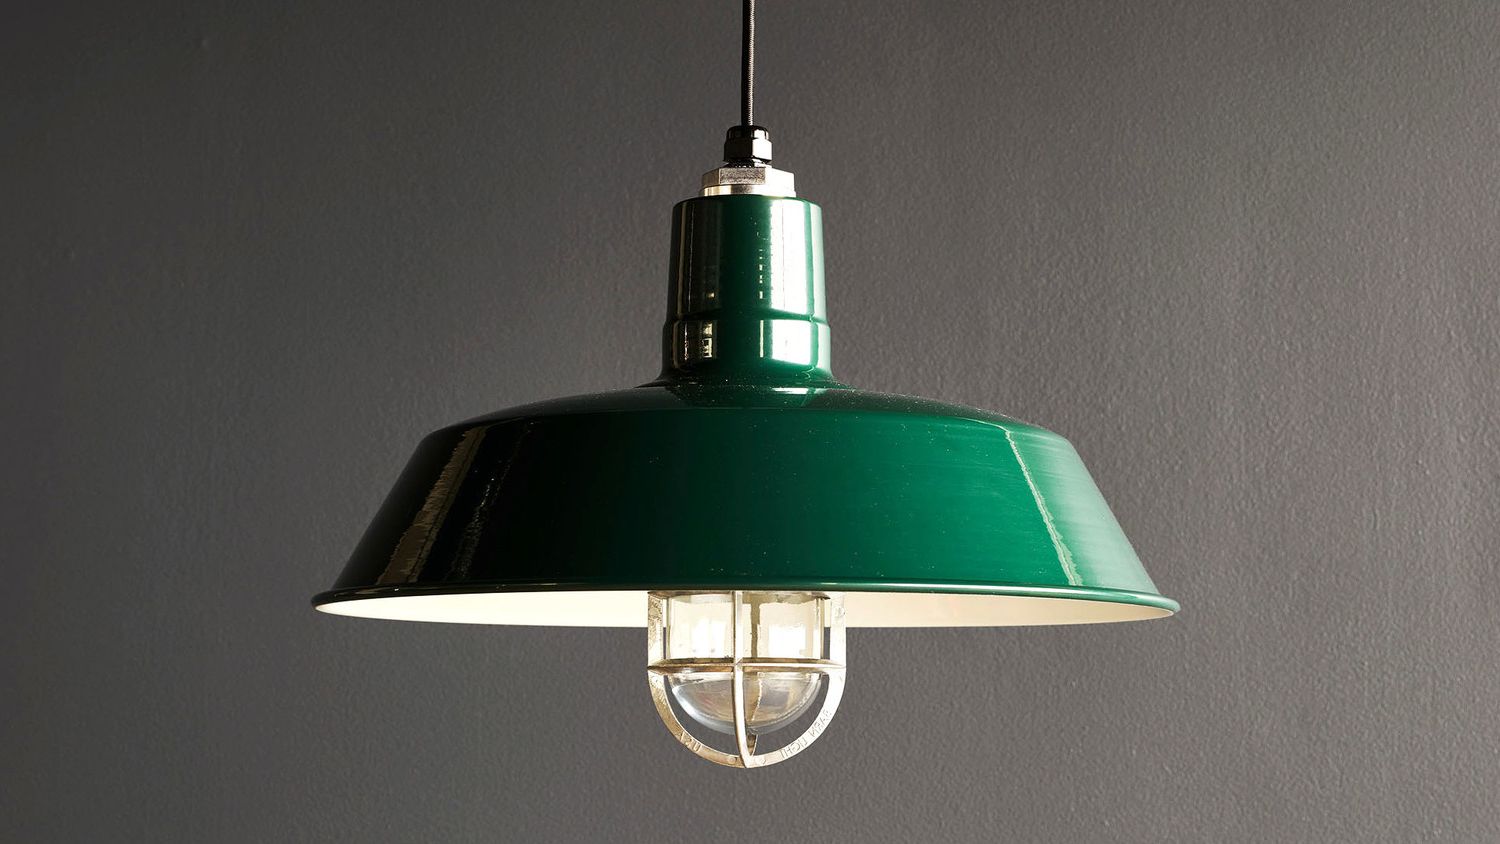 Shopping Special: Birch Lane™ Heritage Ninette 1 Light Dome Intended For Widely Used Ninette 1 Light Dome Pendants (View 22 of 25)